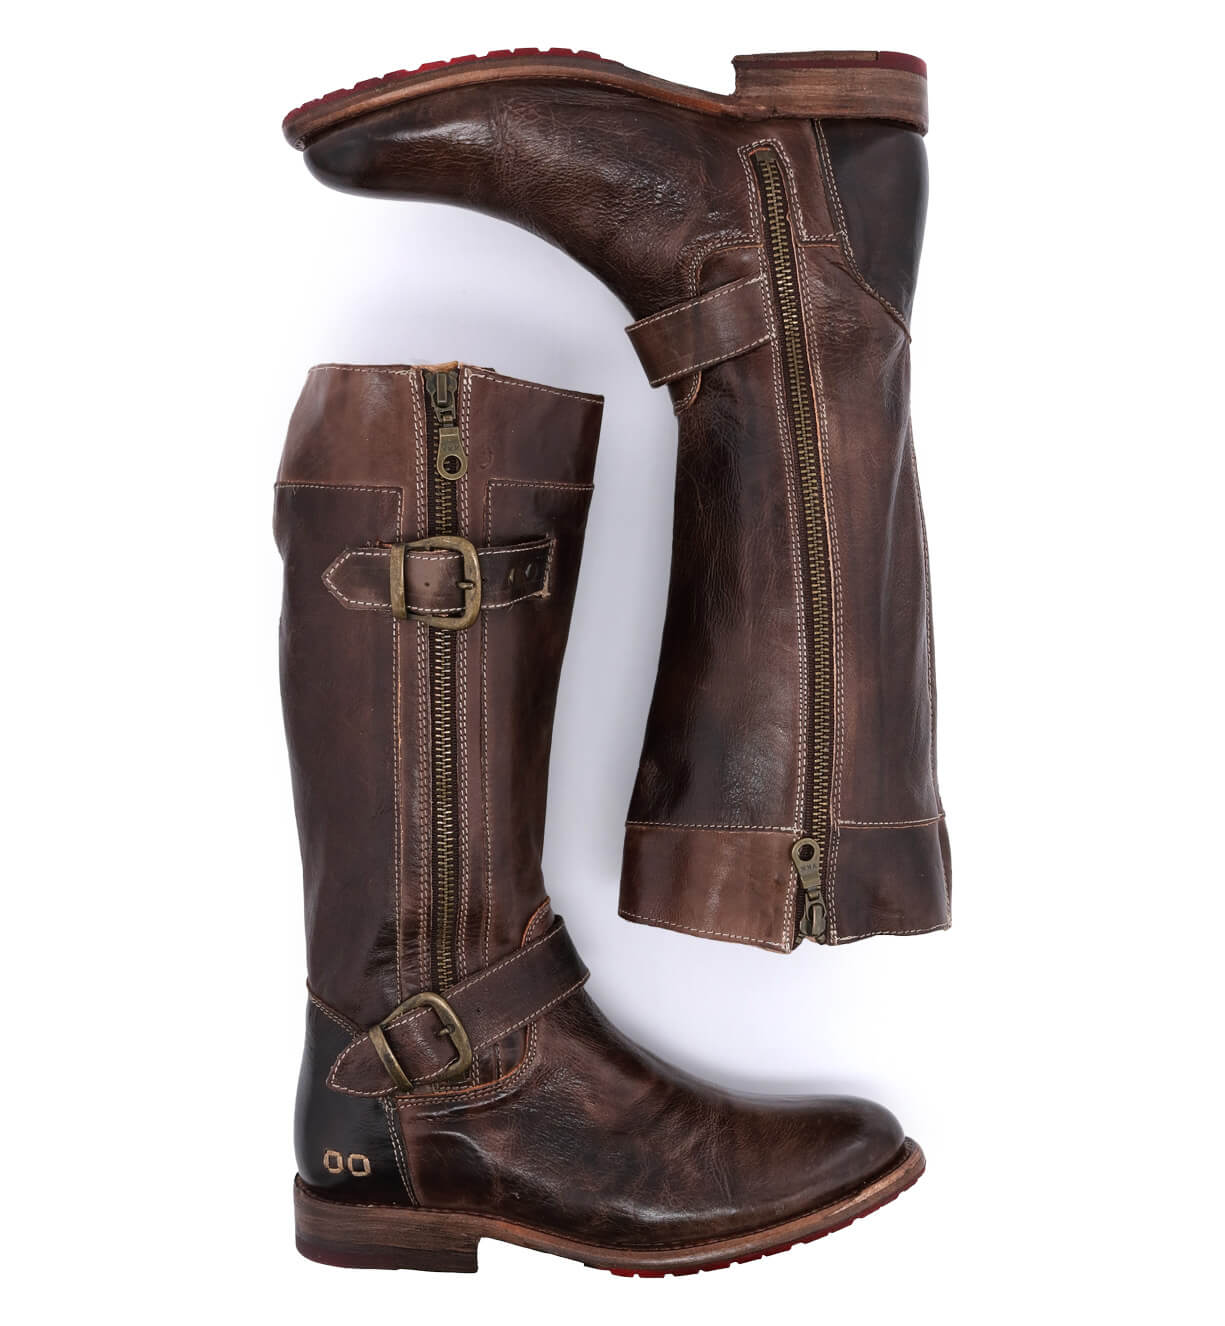 A pair of Bed Stu Gogo Lug brown leather boots with buckles and zippers.